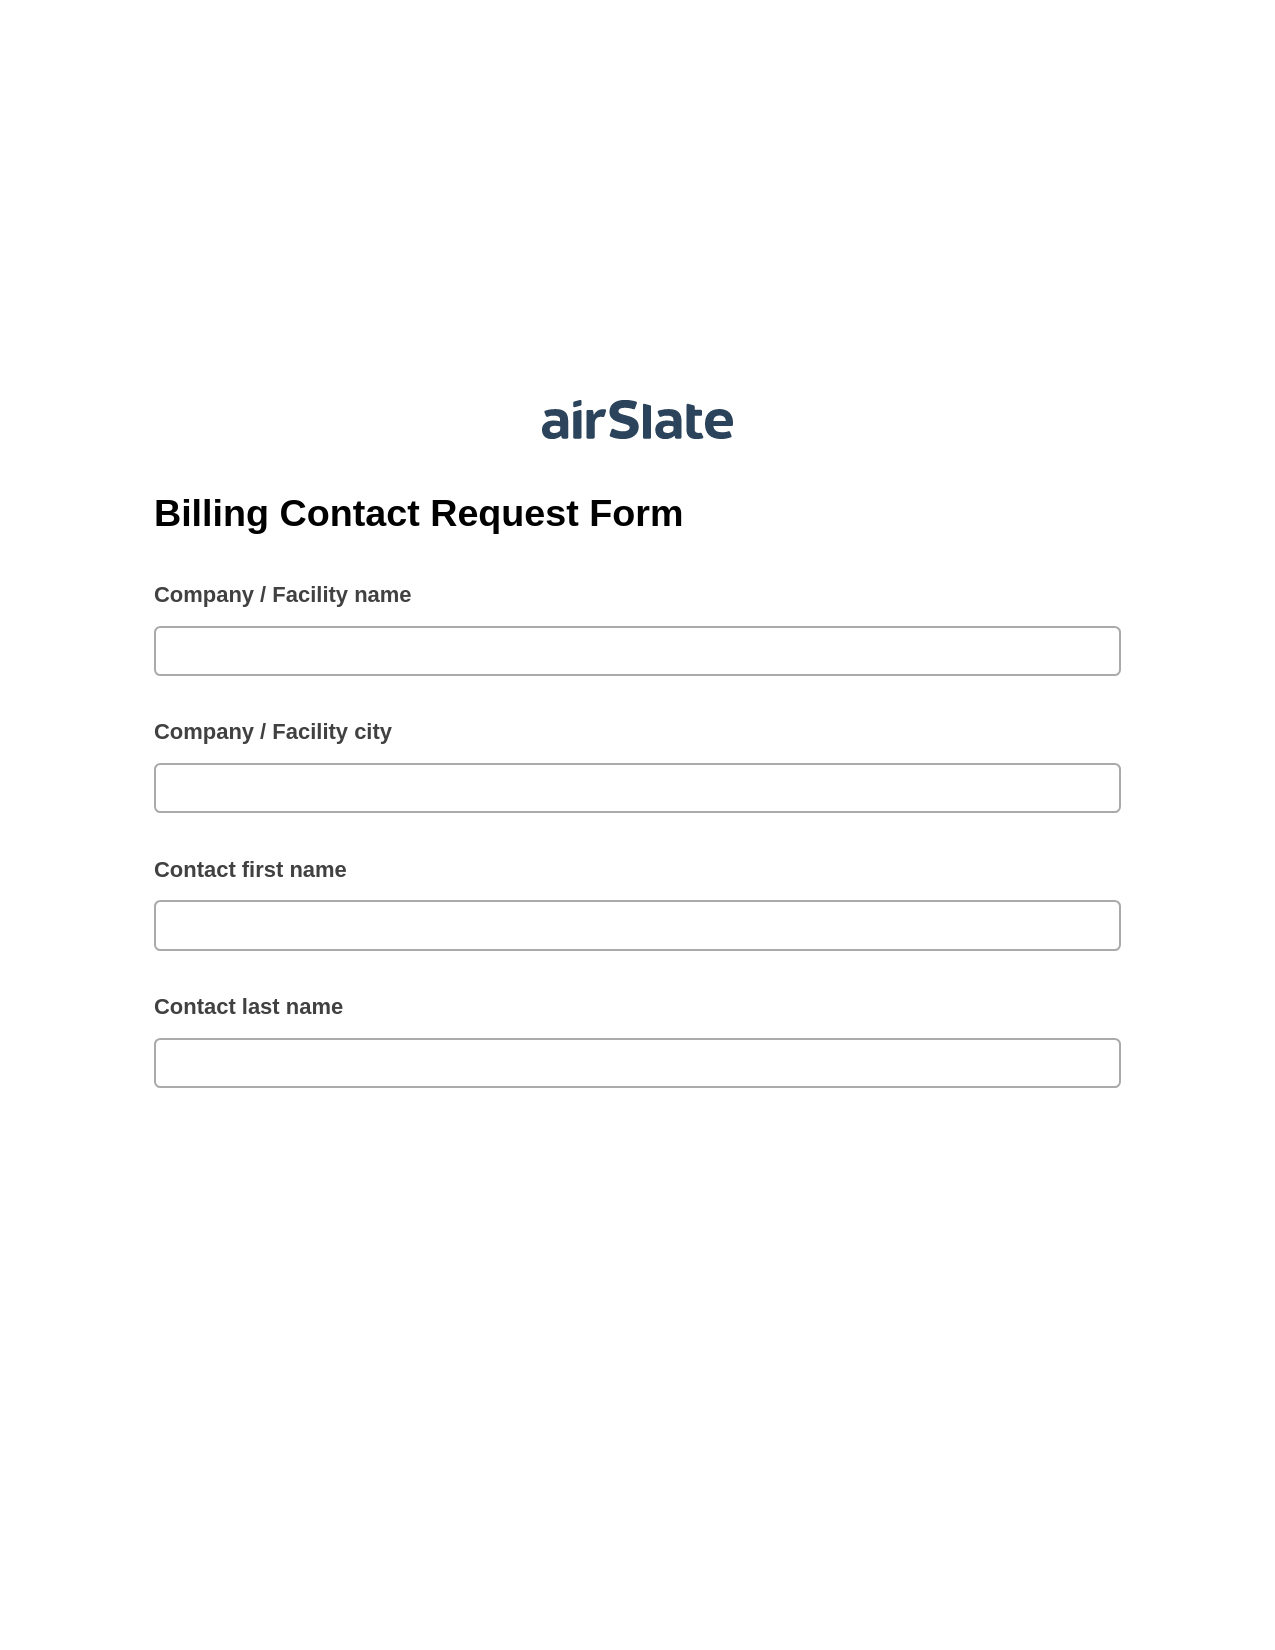 Billing Contact Request Form Pre-fill Slate from MS Dynamics 365 Records Bot, Roles Reminder Bot, Post-finish Document Bot